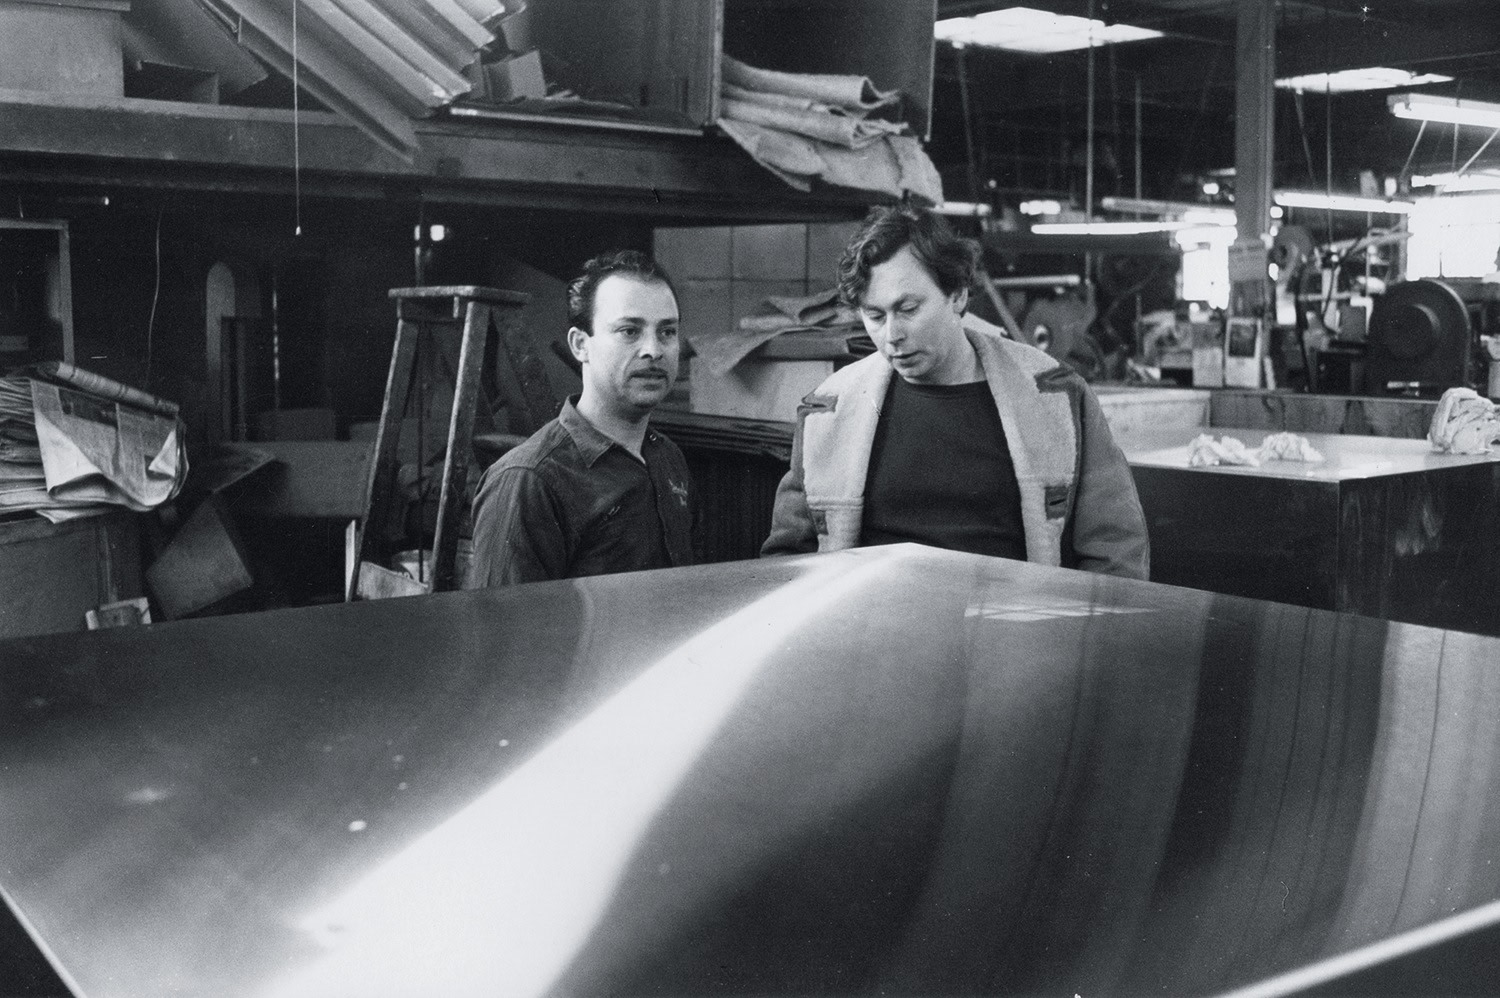 Jos&amp;eacute; Otero and Donald Judd at Bernstein Brothers, Inc., New York, 1968.

Photo &amp;copy;&amp;nbsp;Elizabeth C. Baker /&amp;nbsp;Donald Judd Art &amp;copy; Judd Foundation / Artists Rights Society (ARS), New York.